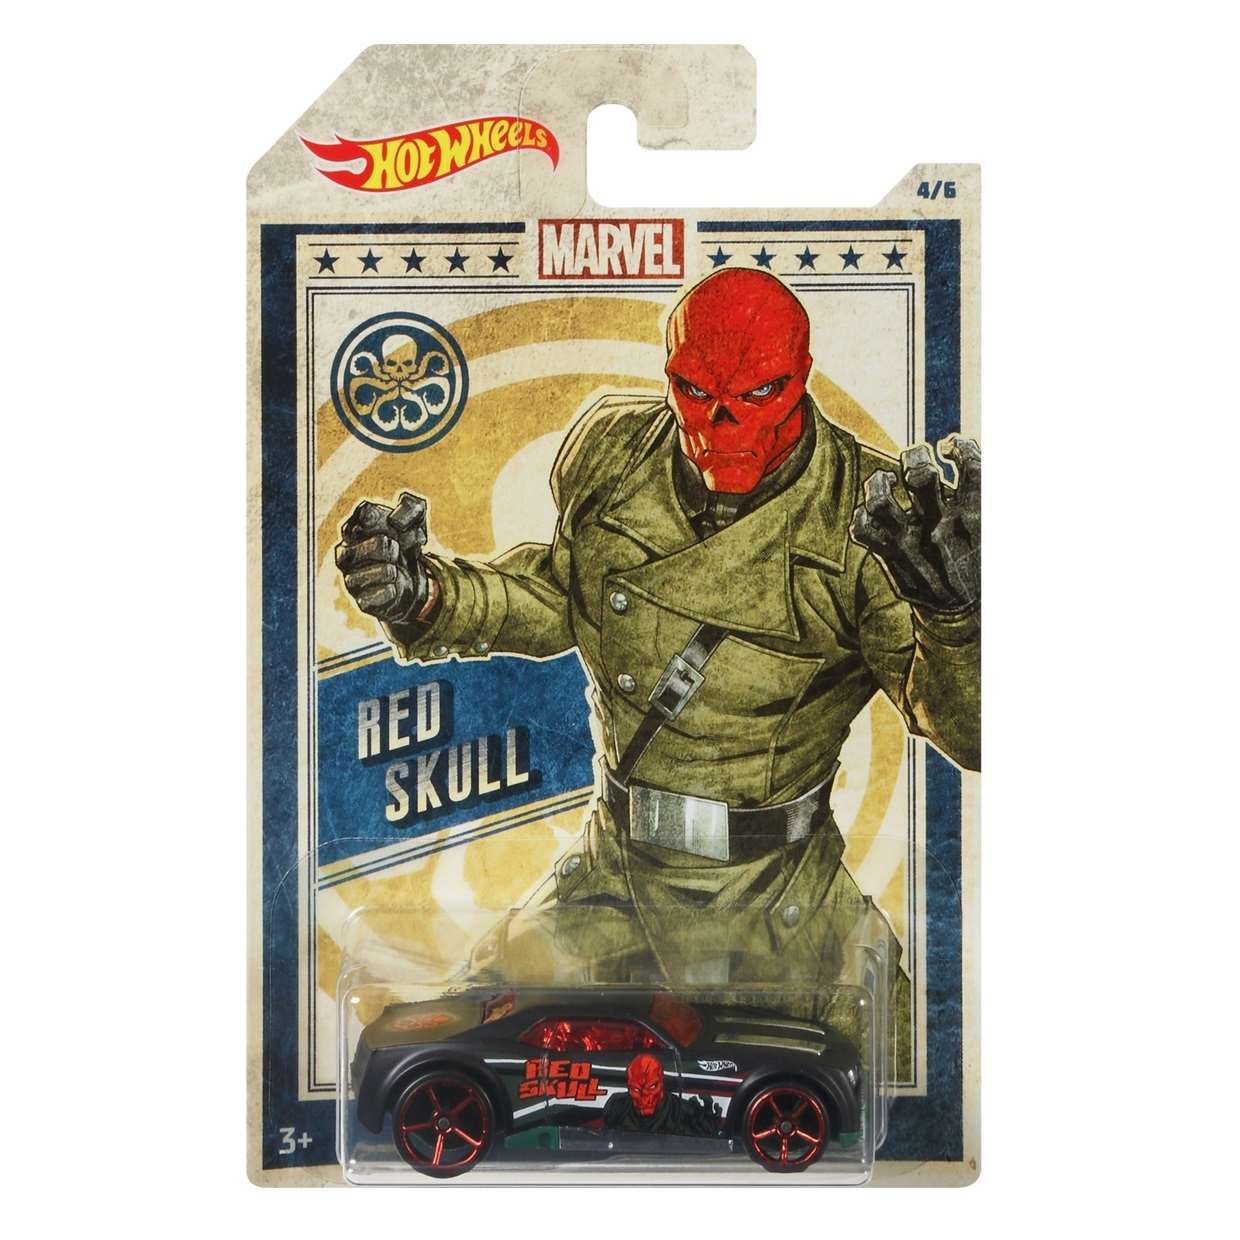 Red Skull Bully Goat 4/6 Hot Wheels Collect Them All